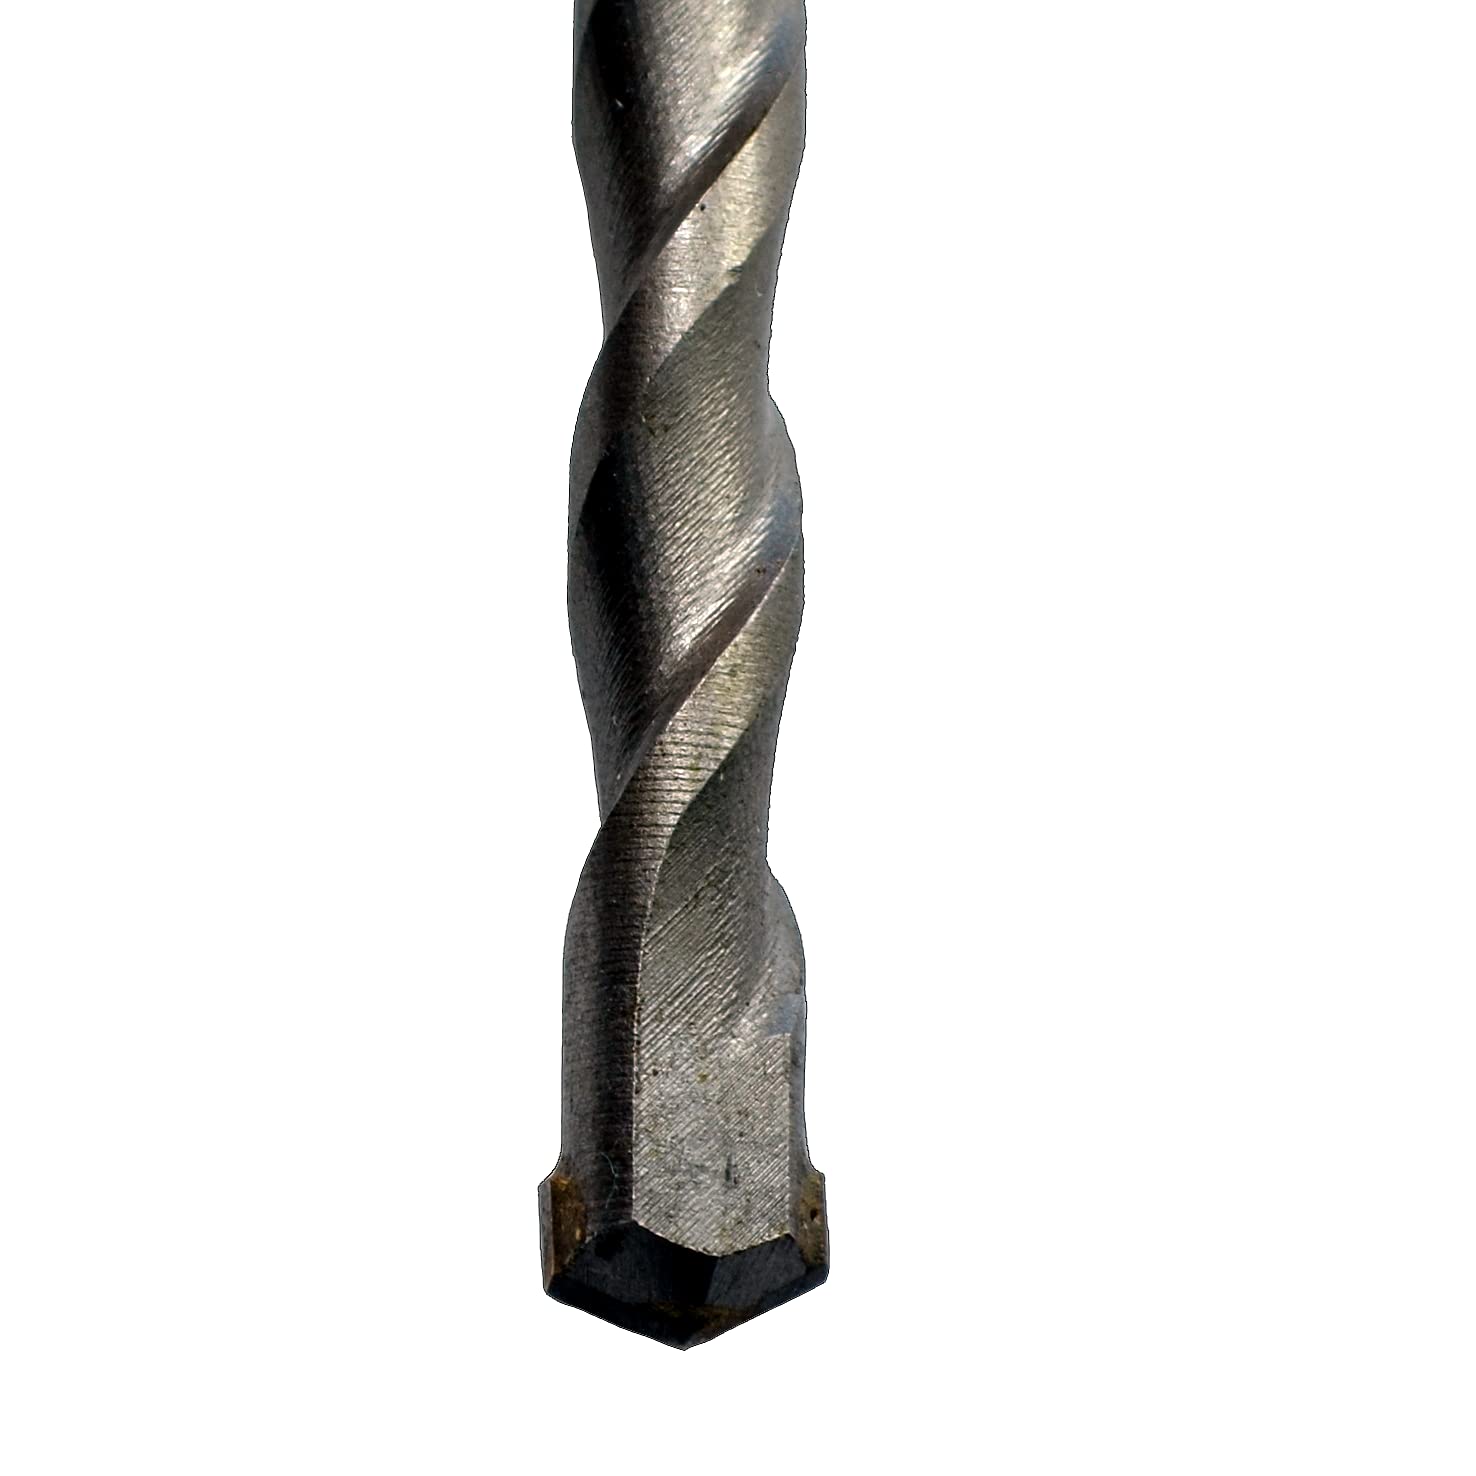 SDS Plus Core Drill Bit Adapter with Pilot Drill Core Drill Bit Extended Adapter with TCT Pilot Drill Bit for 6" Long Core Drill Bits Drill Deep Deep Holes for Drilling Concrete Brick and Masonry